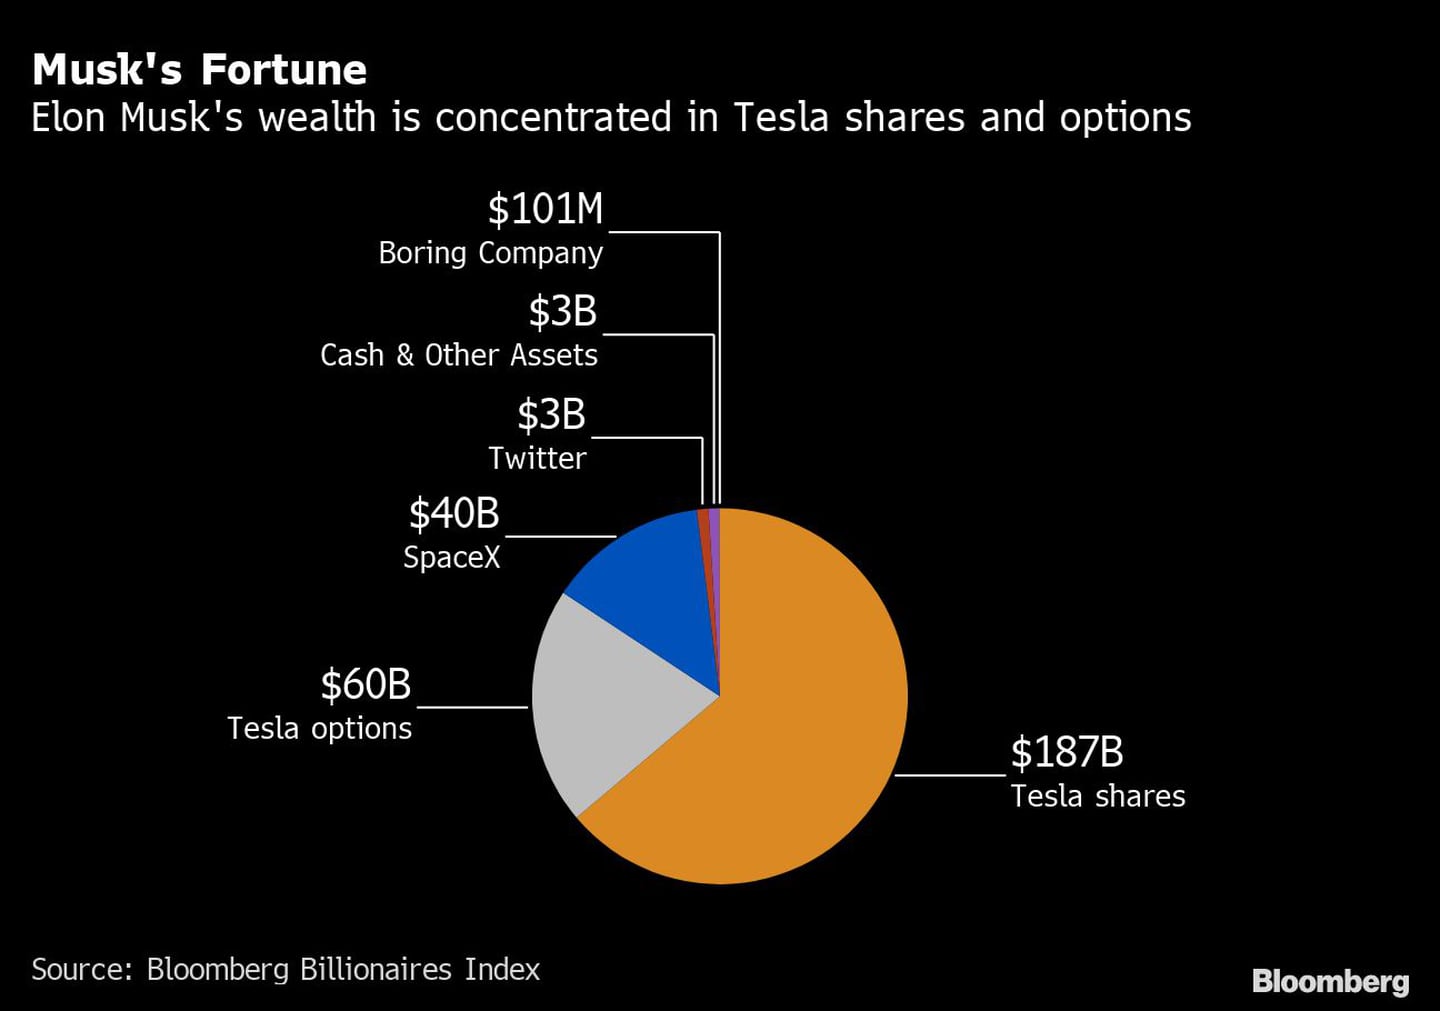 Musk's Fortune | Elon Musk's wealth is concentrated in Tesla shares and optionsdfd